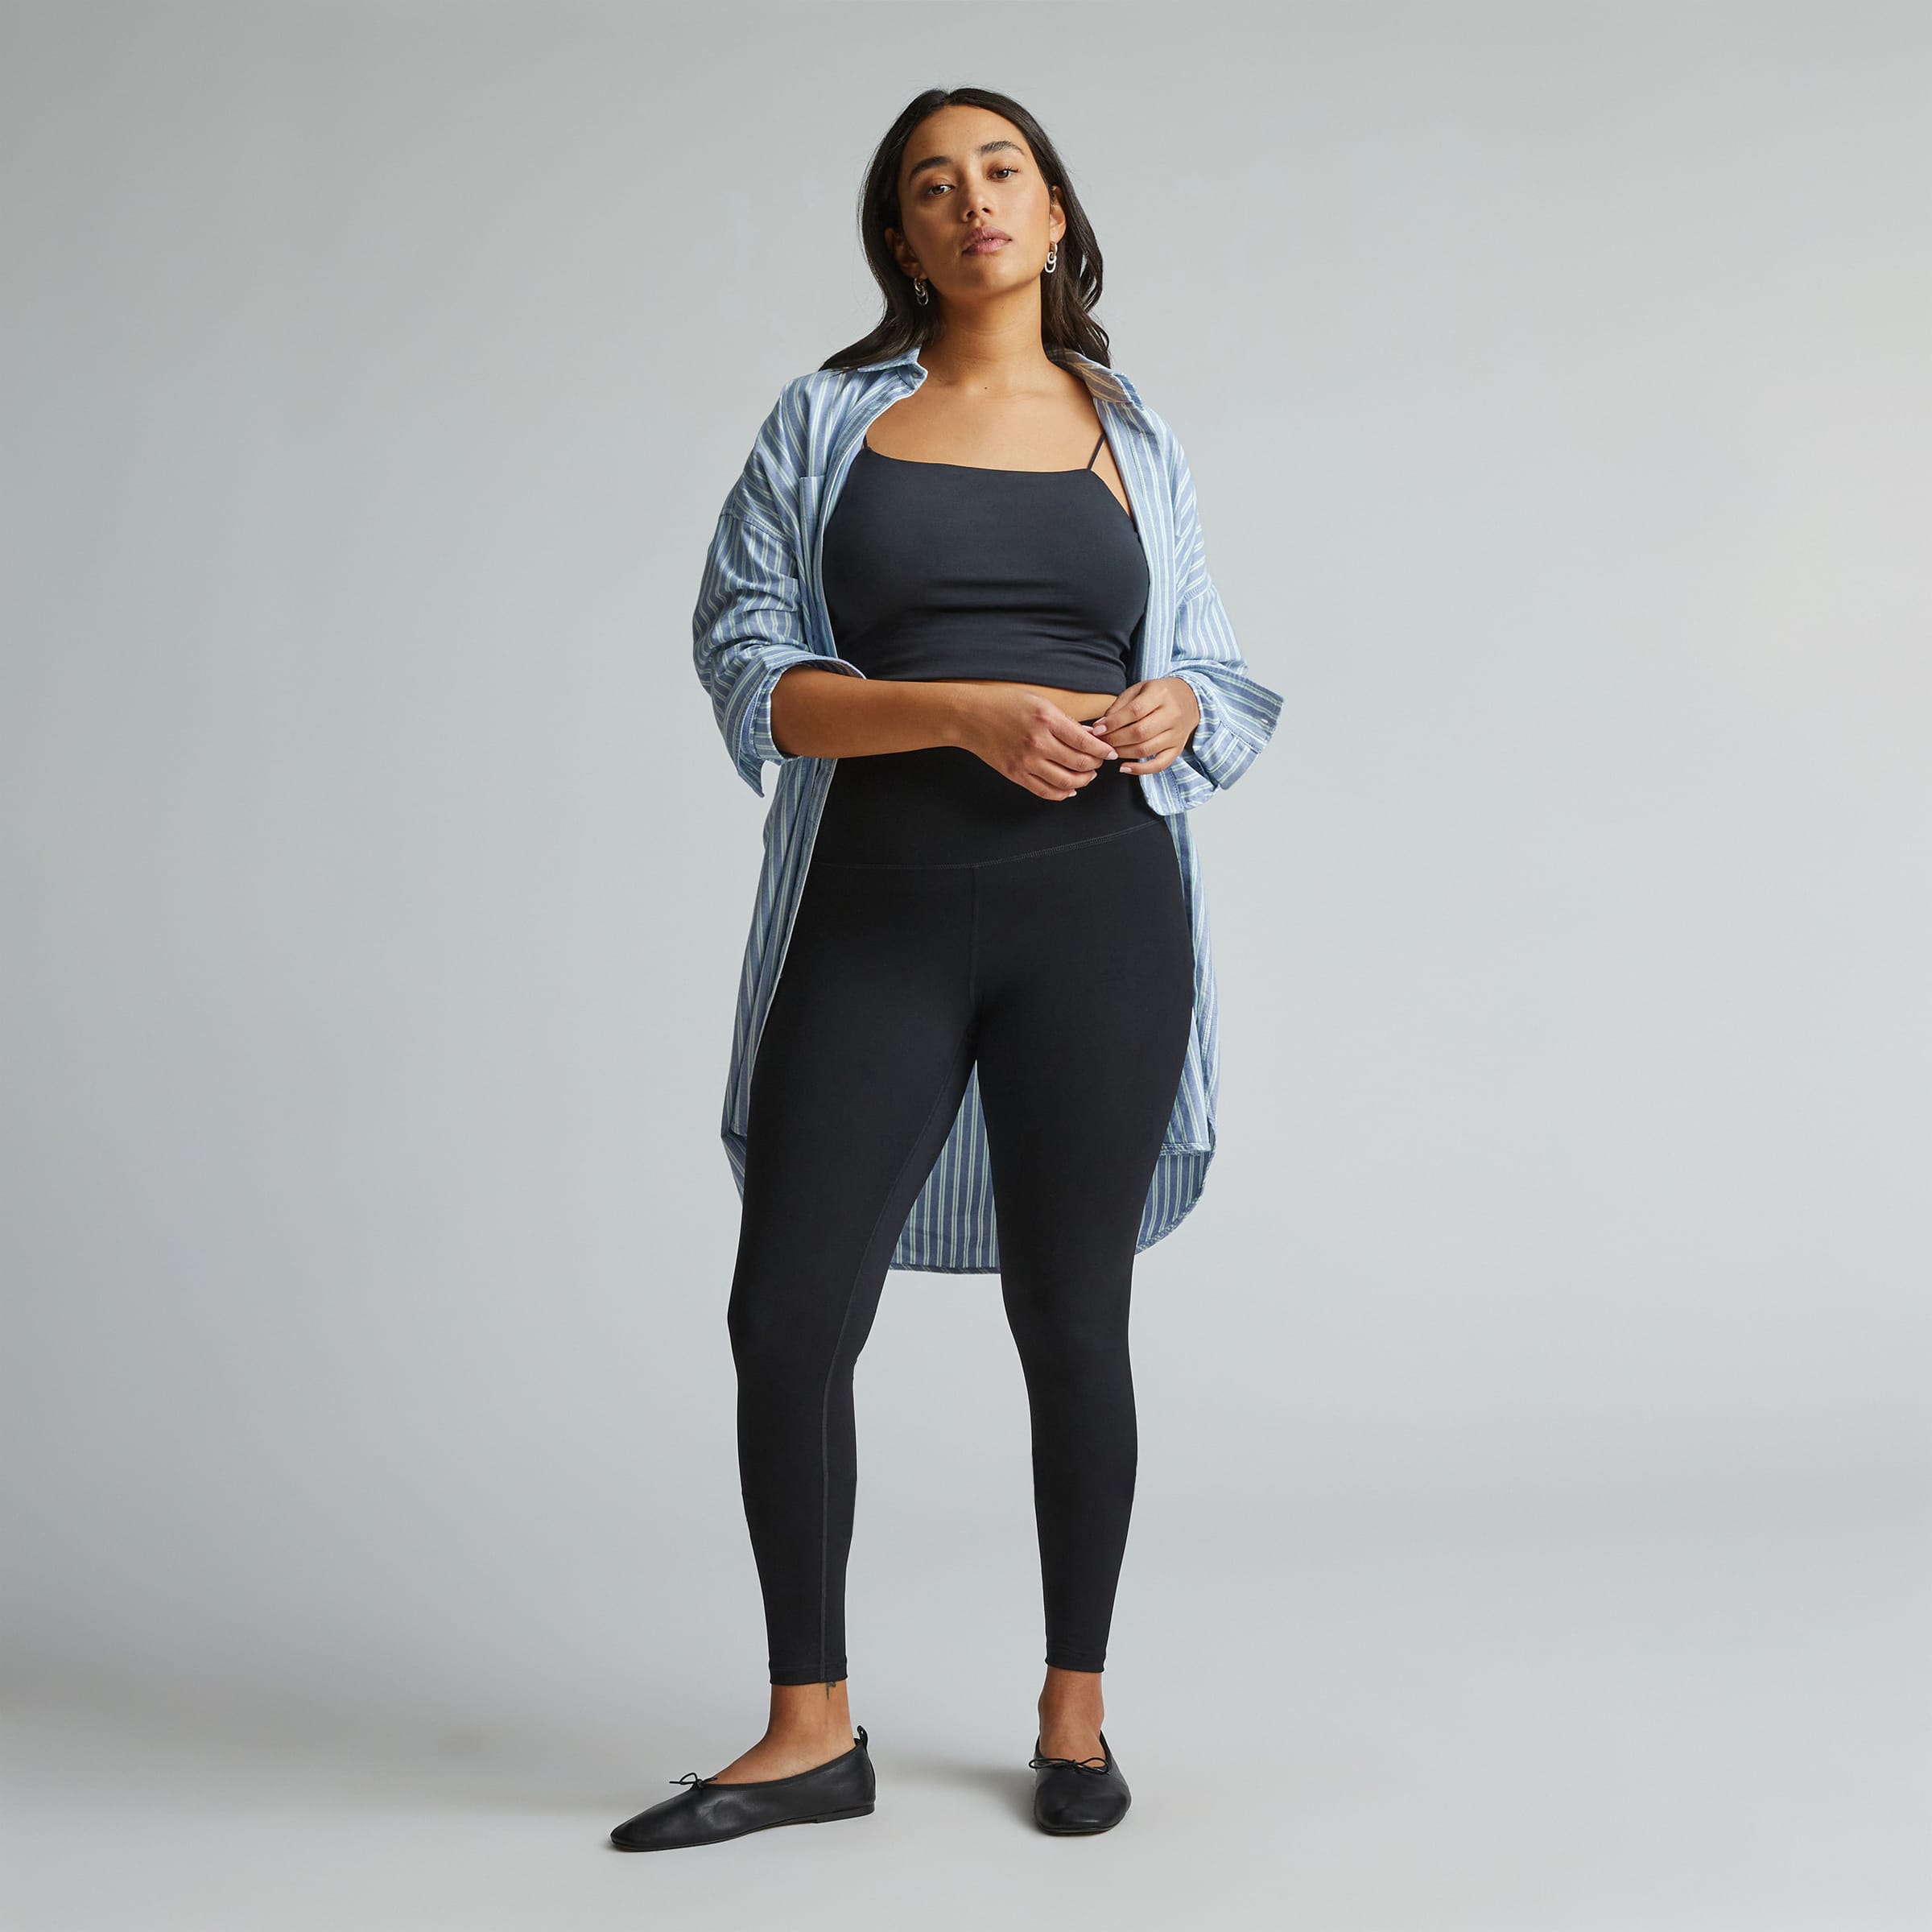 8 Legging Outfit Ideas - From Casual To Chic feat. Everlane